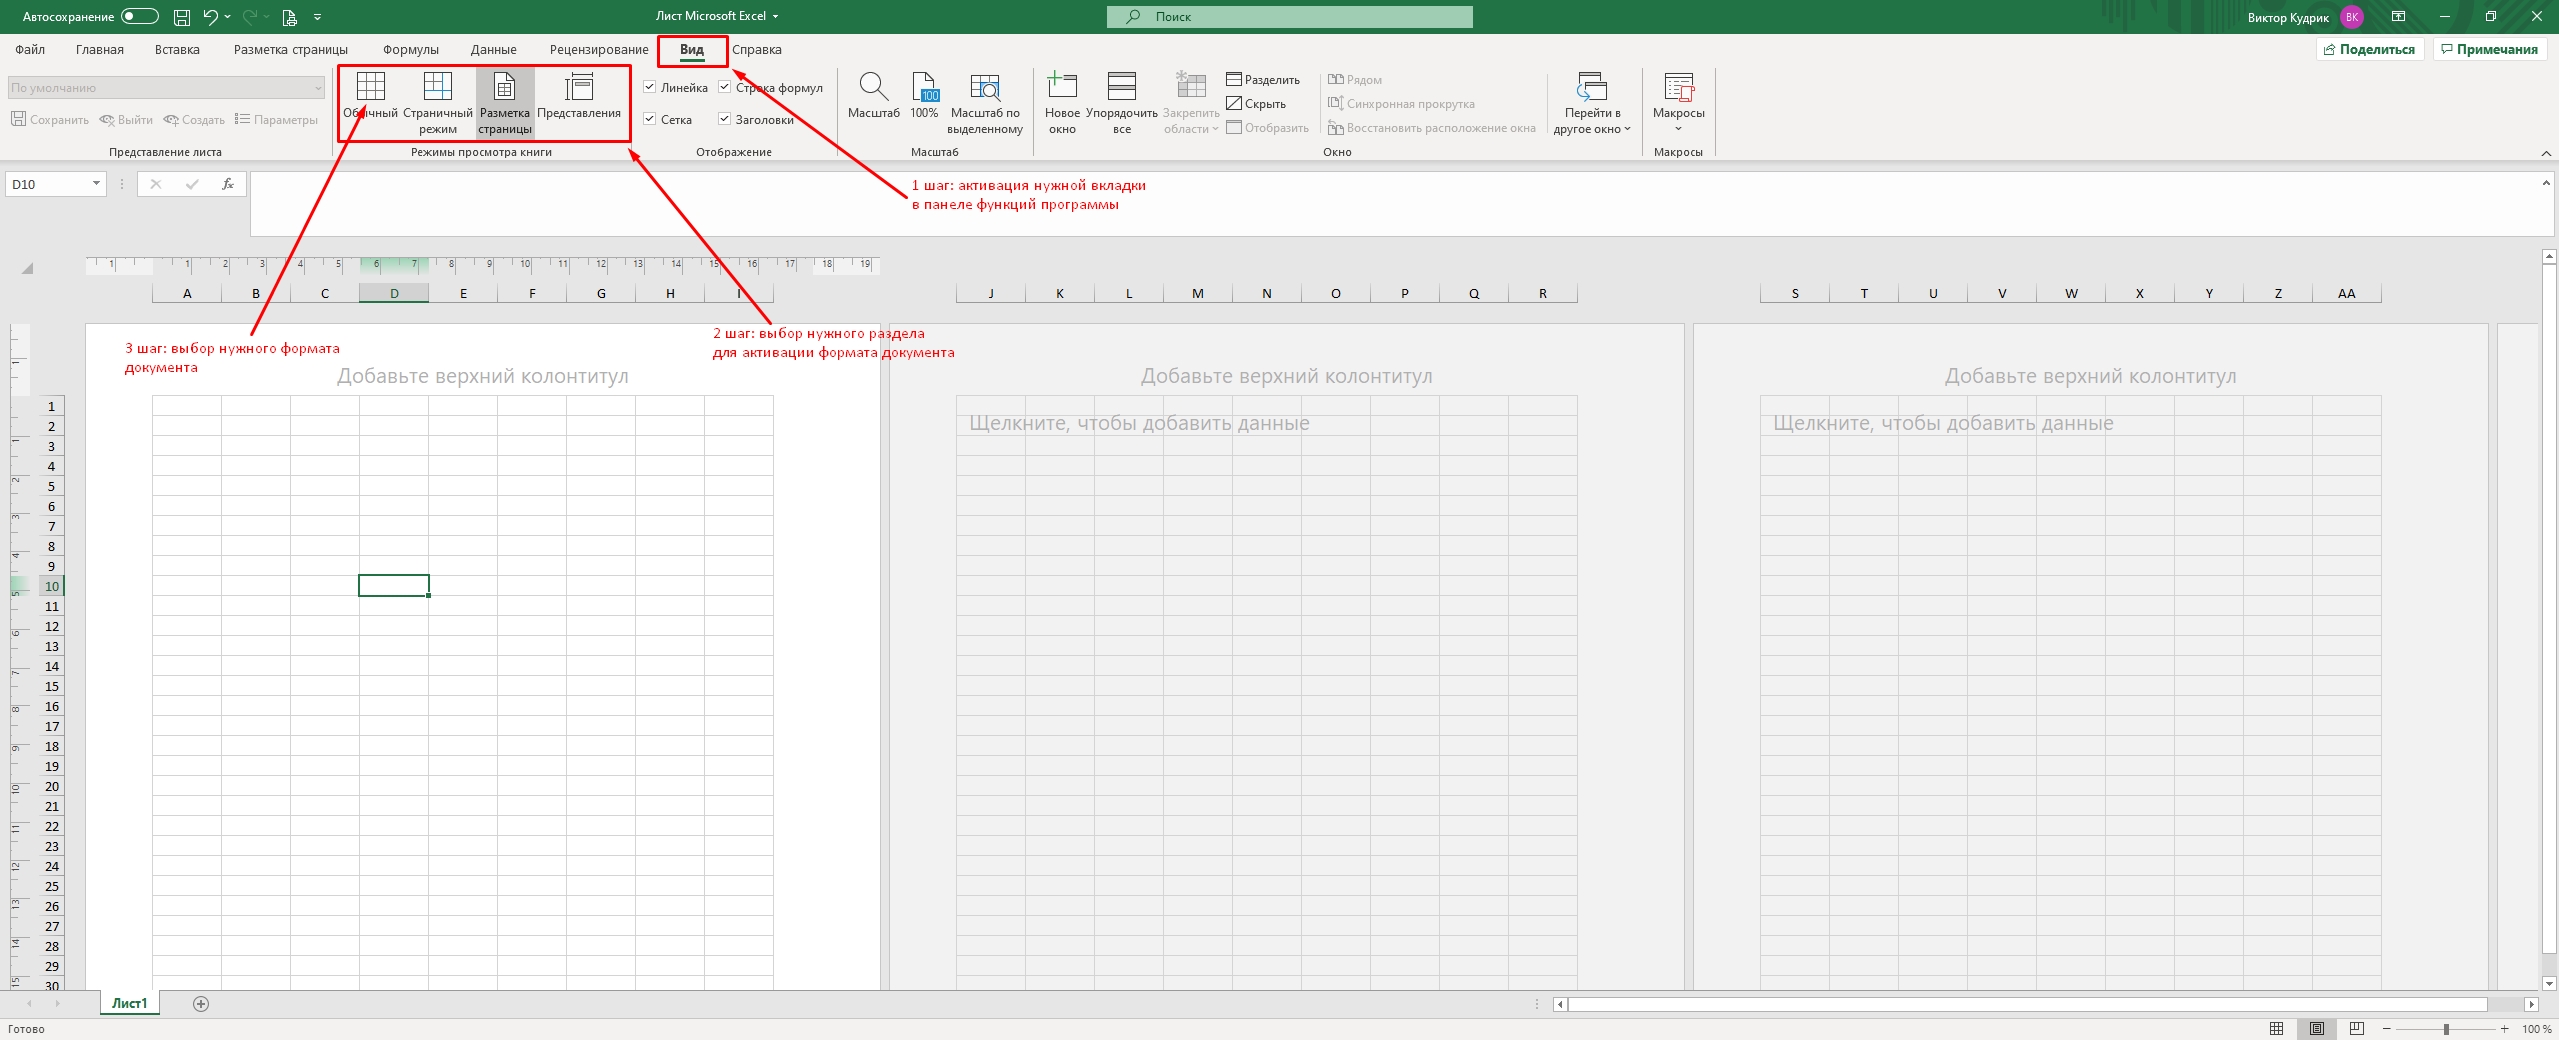 How to remove the inscription Page 1 in Excel